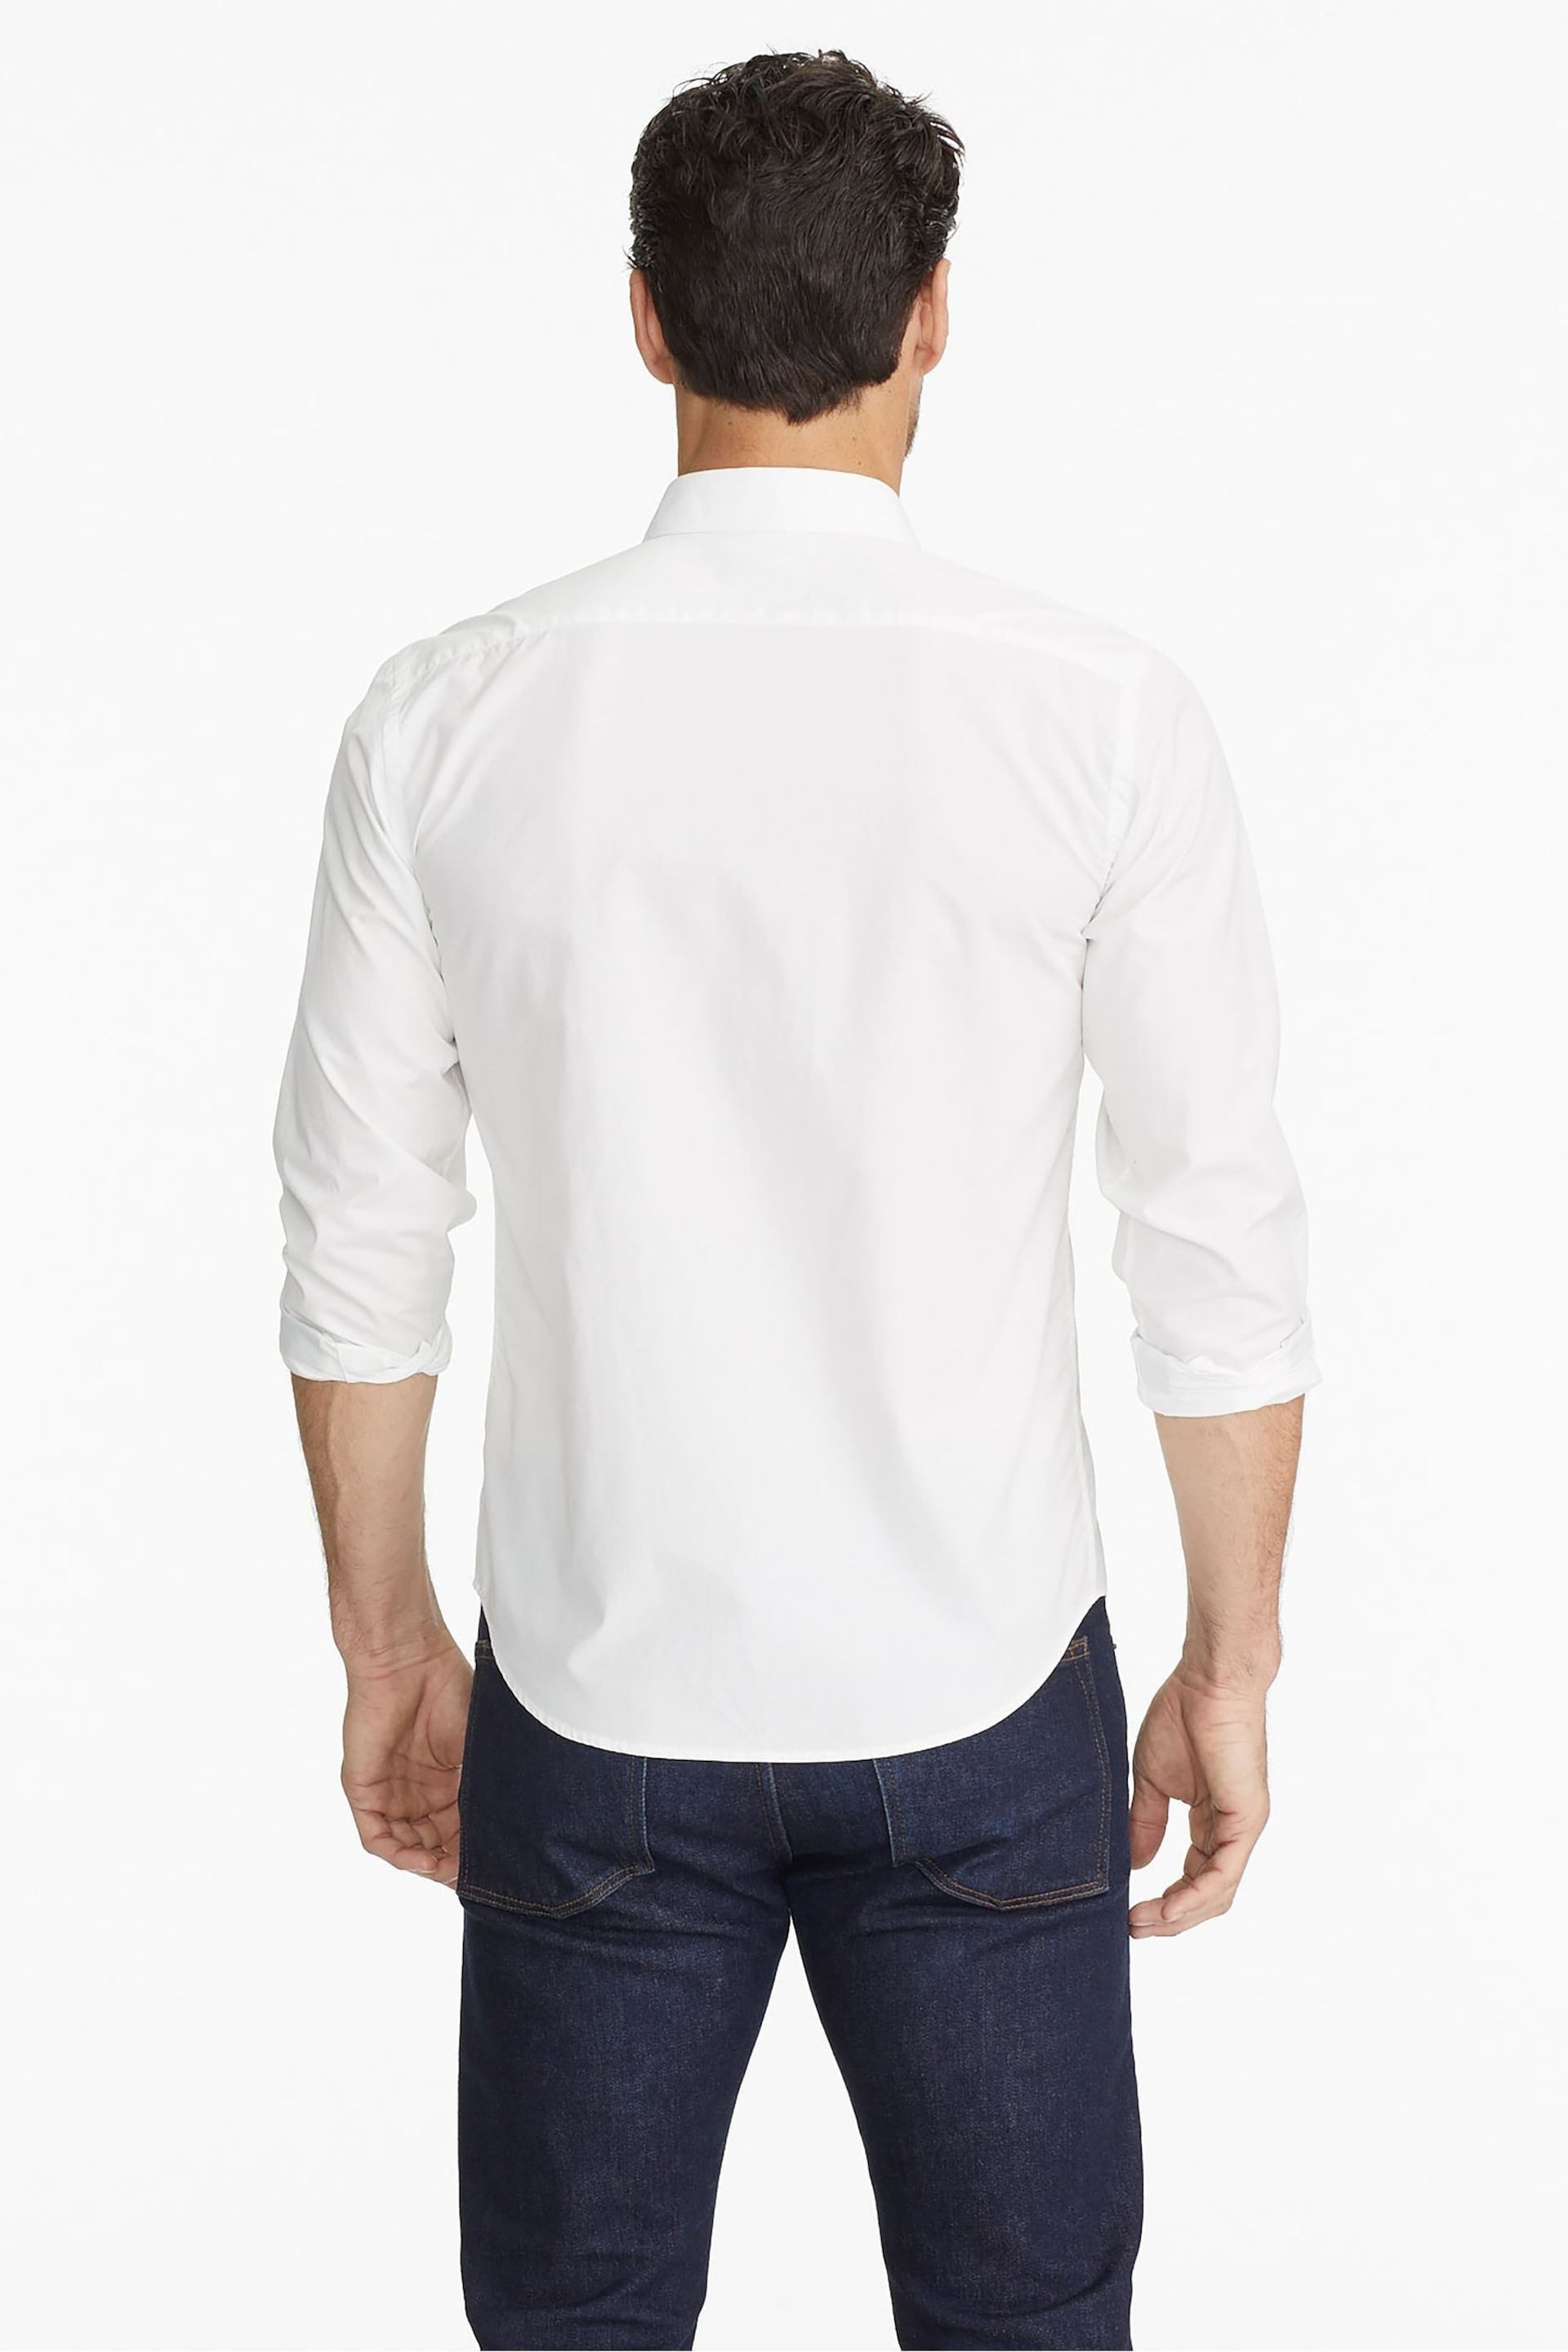 UNTUCKit White/Navy Wrinkle-Free Relaxed Fit Las Cases Special Shirt - Image 2 of 5